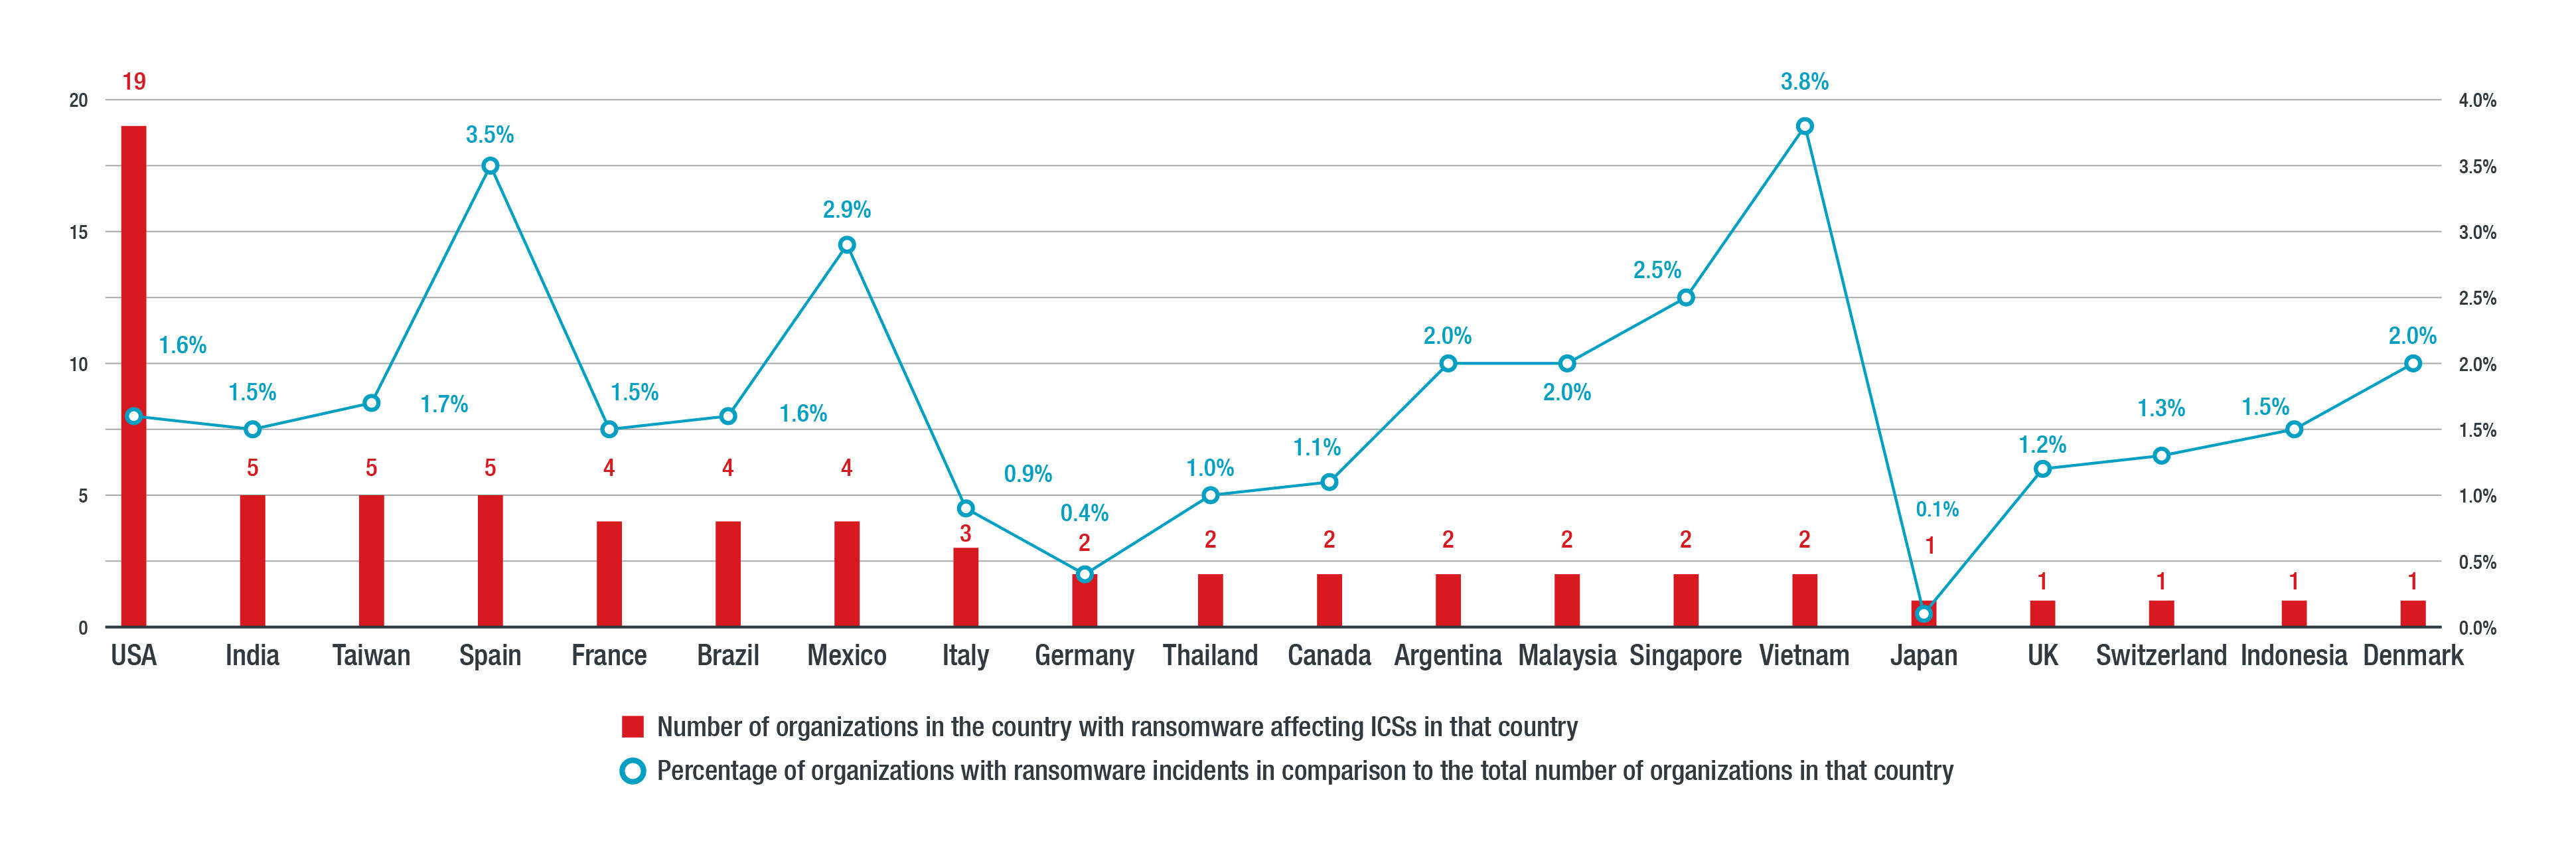 Figure 3. Per country breakdown of organization-related ransomware detections for ICS in 2020